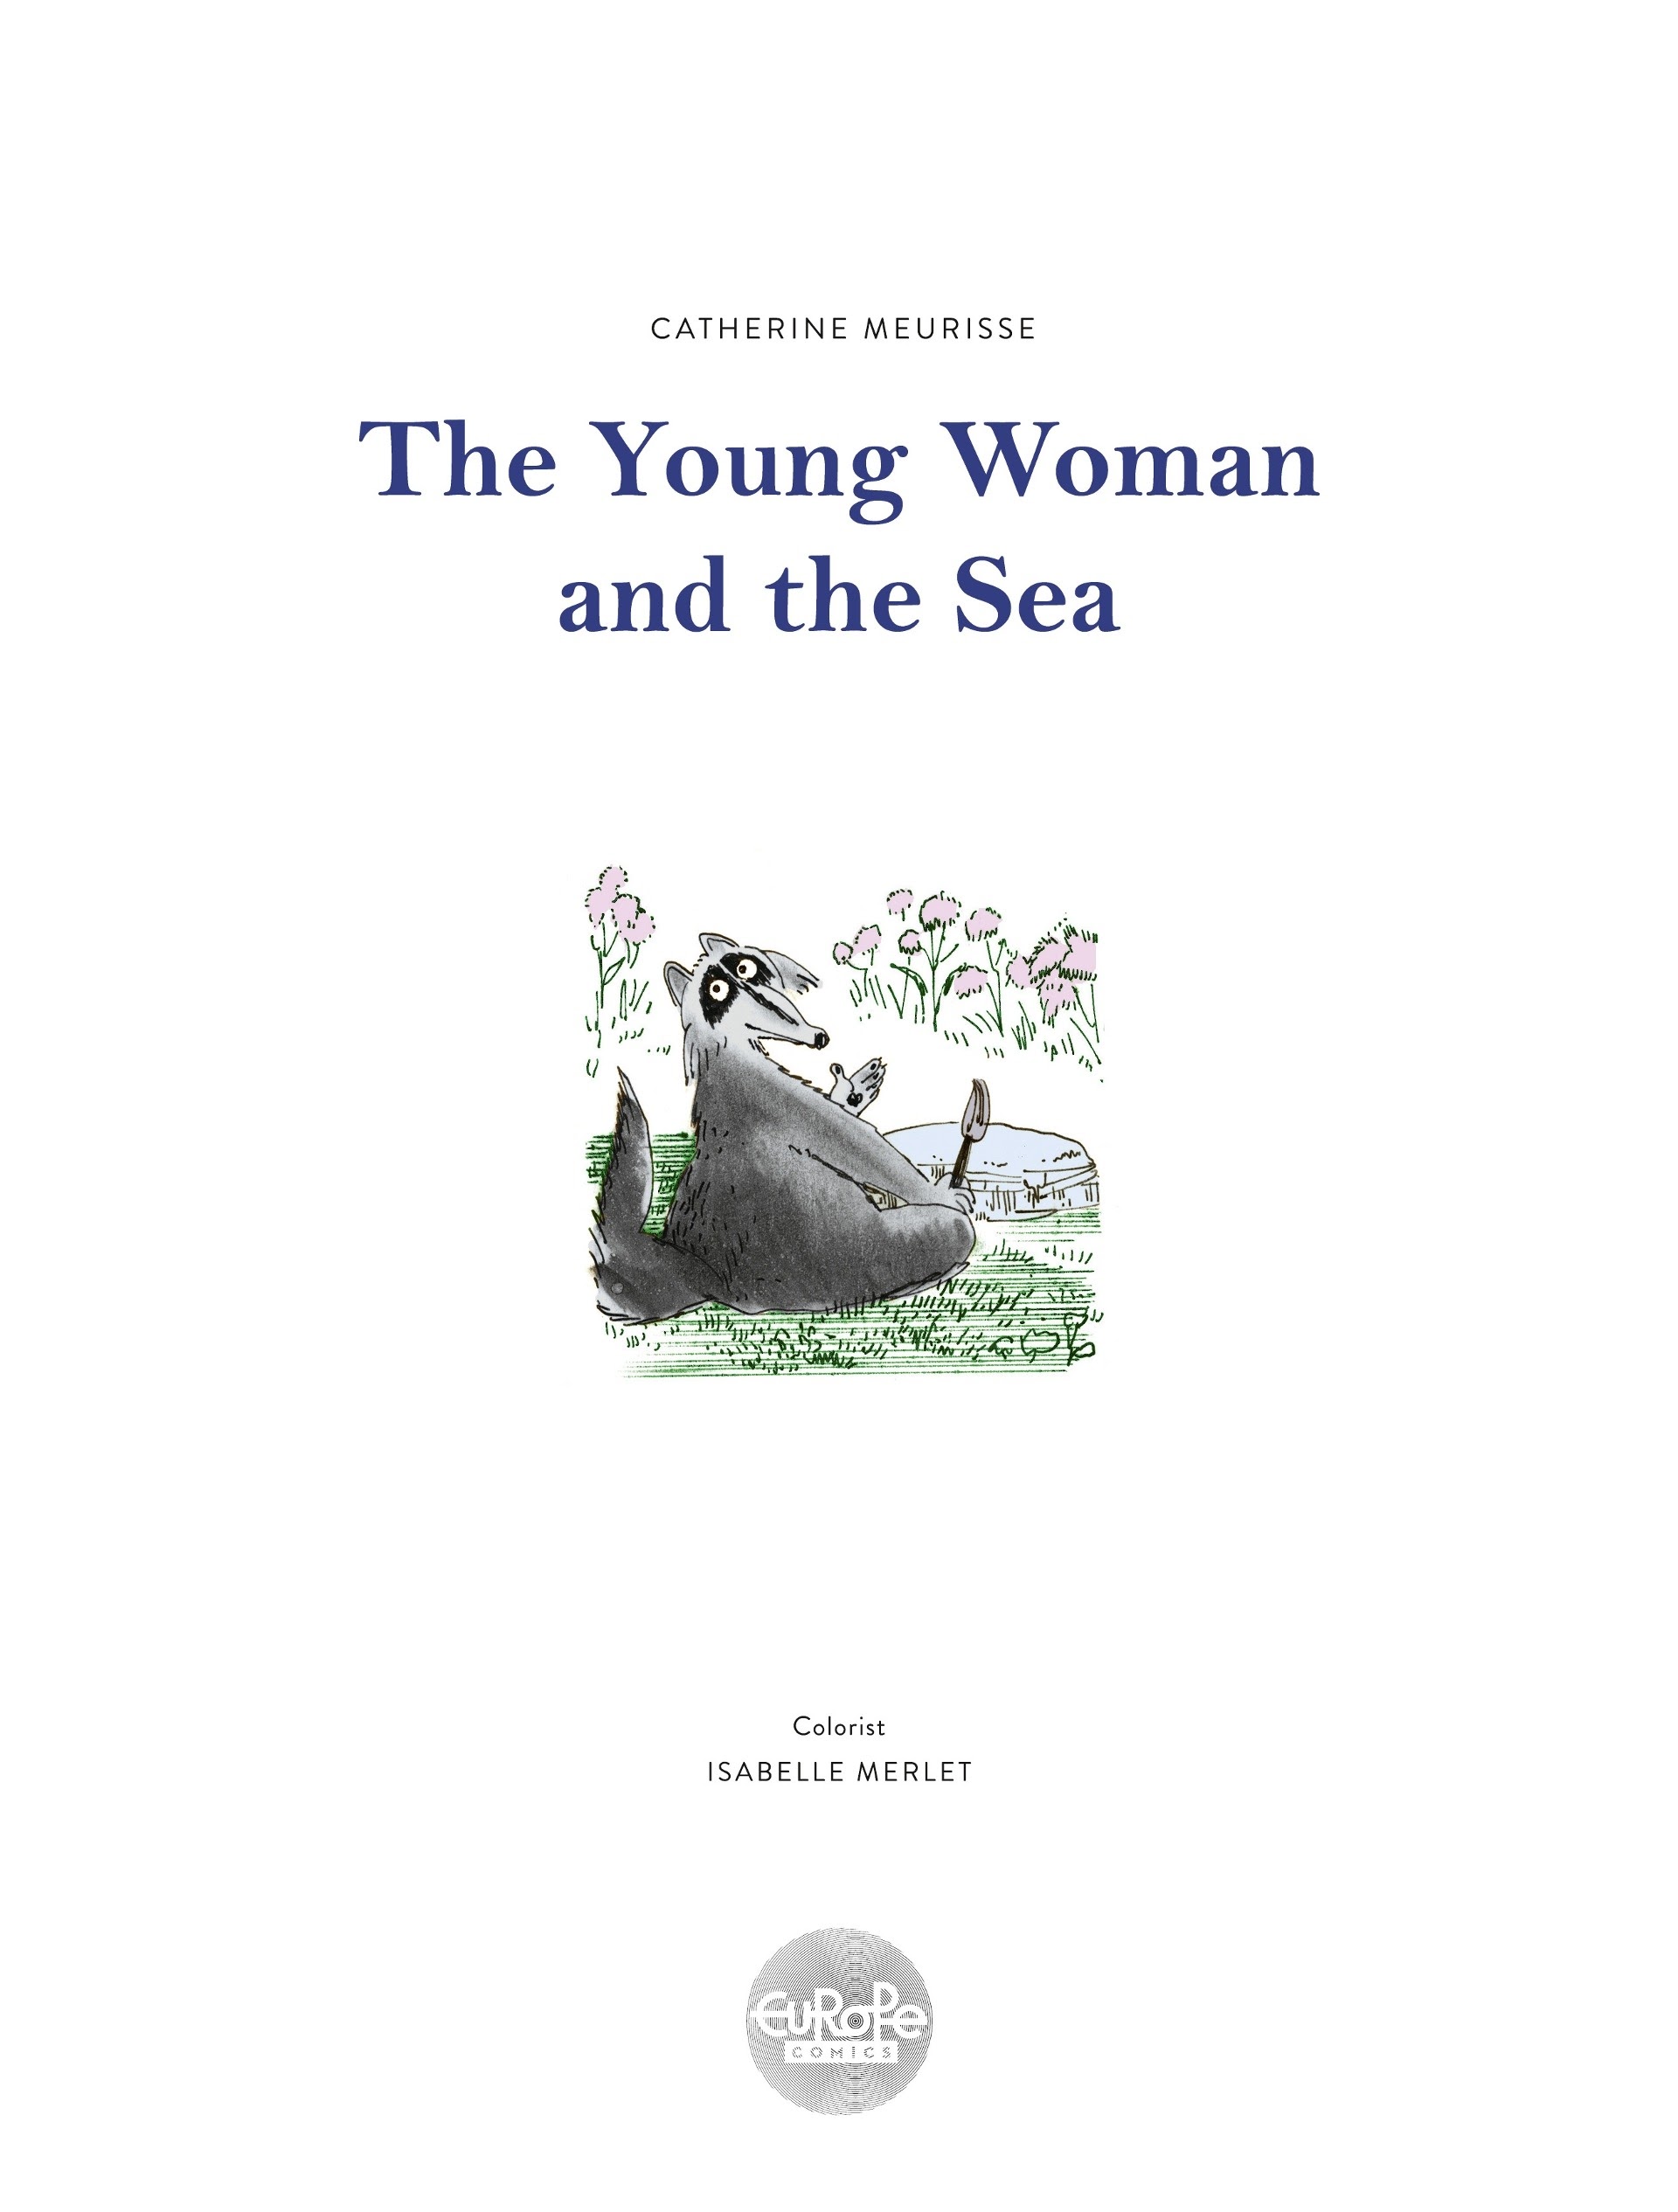 Read online The Young Woman and the Sea comic -  Issue # TPB - 2